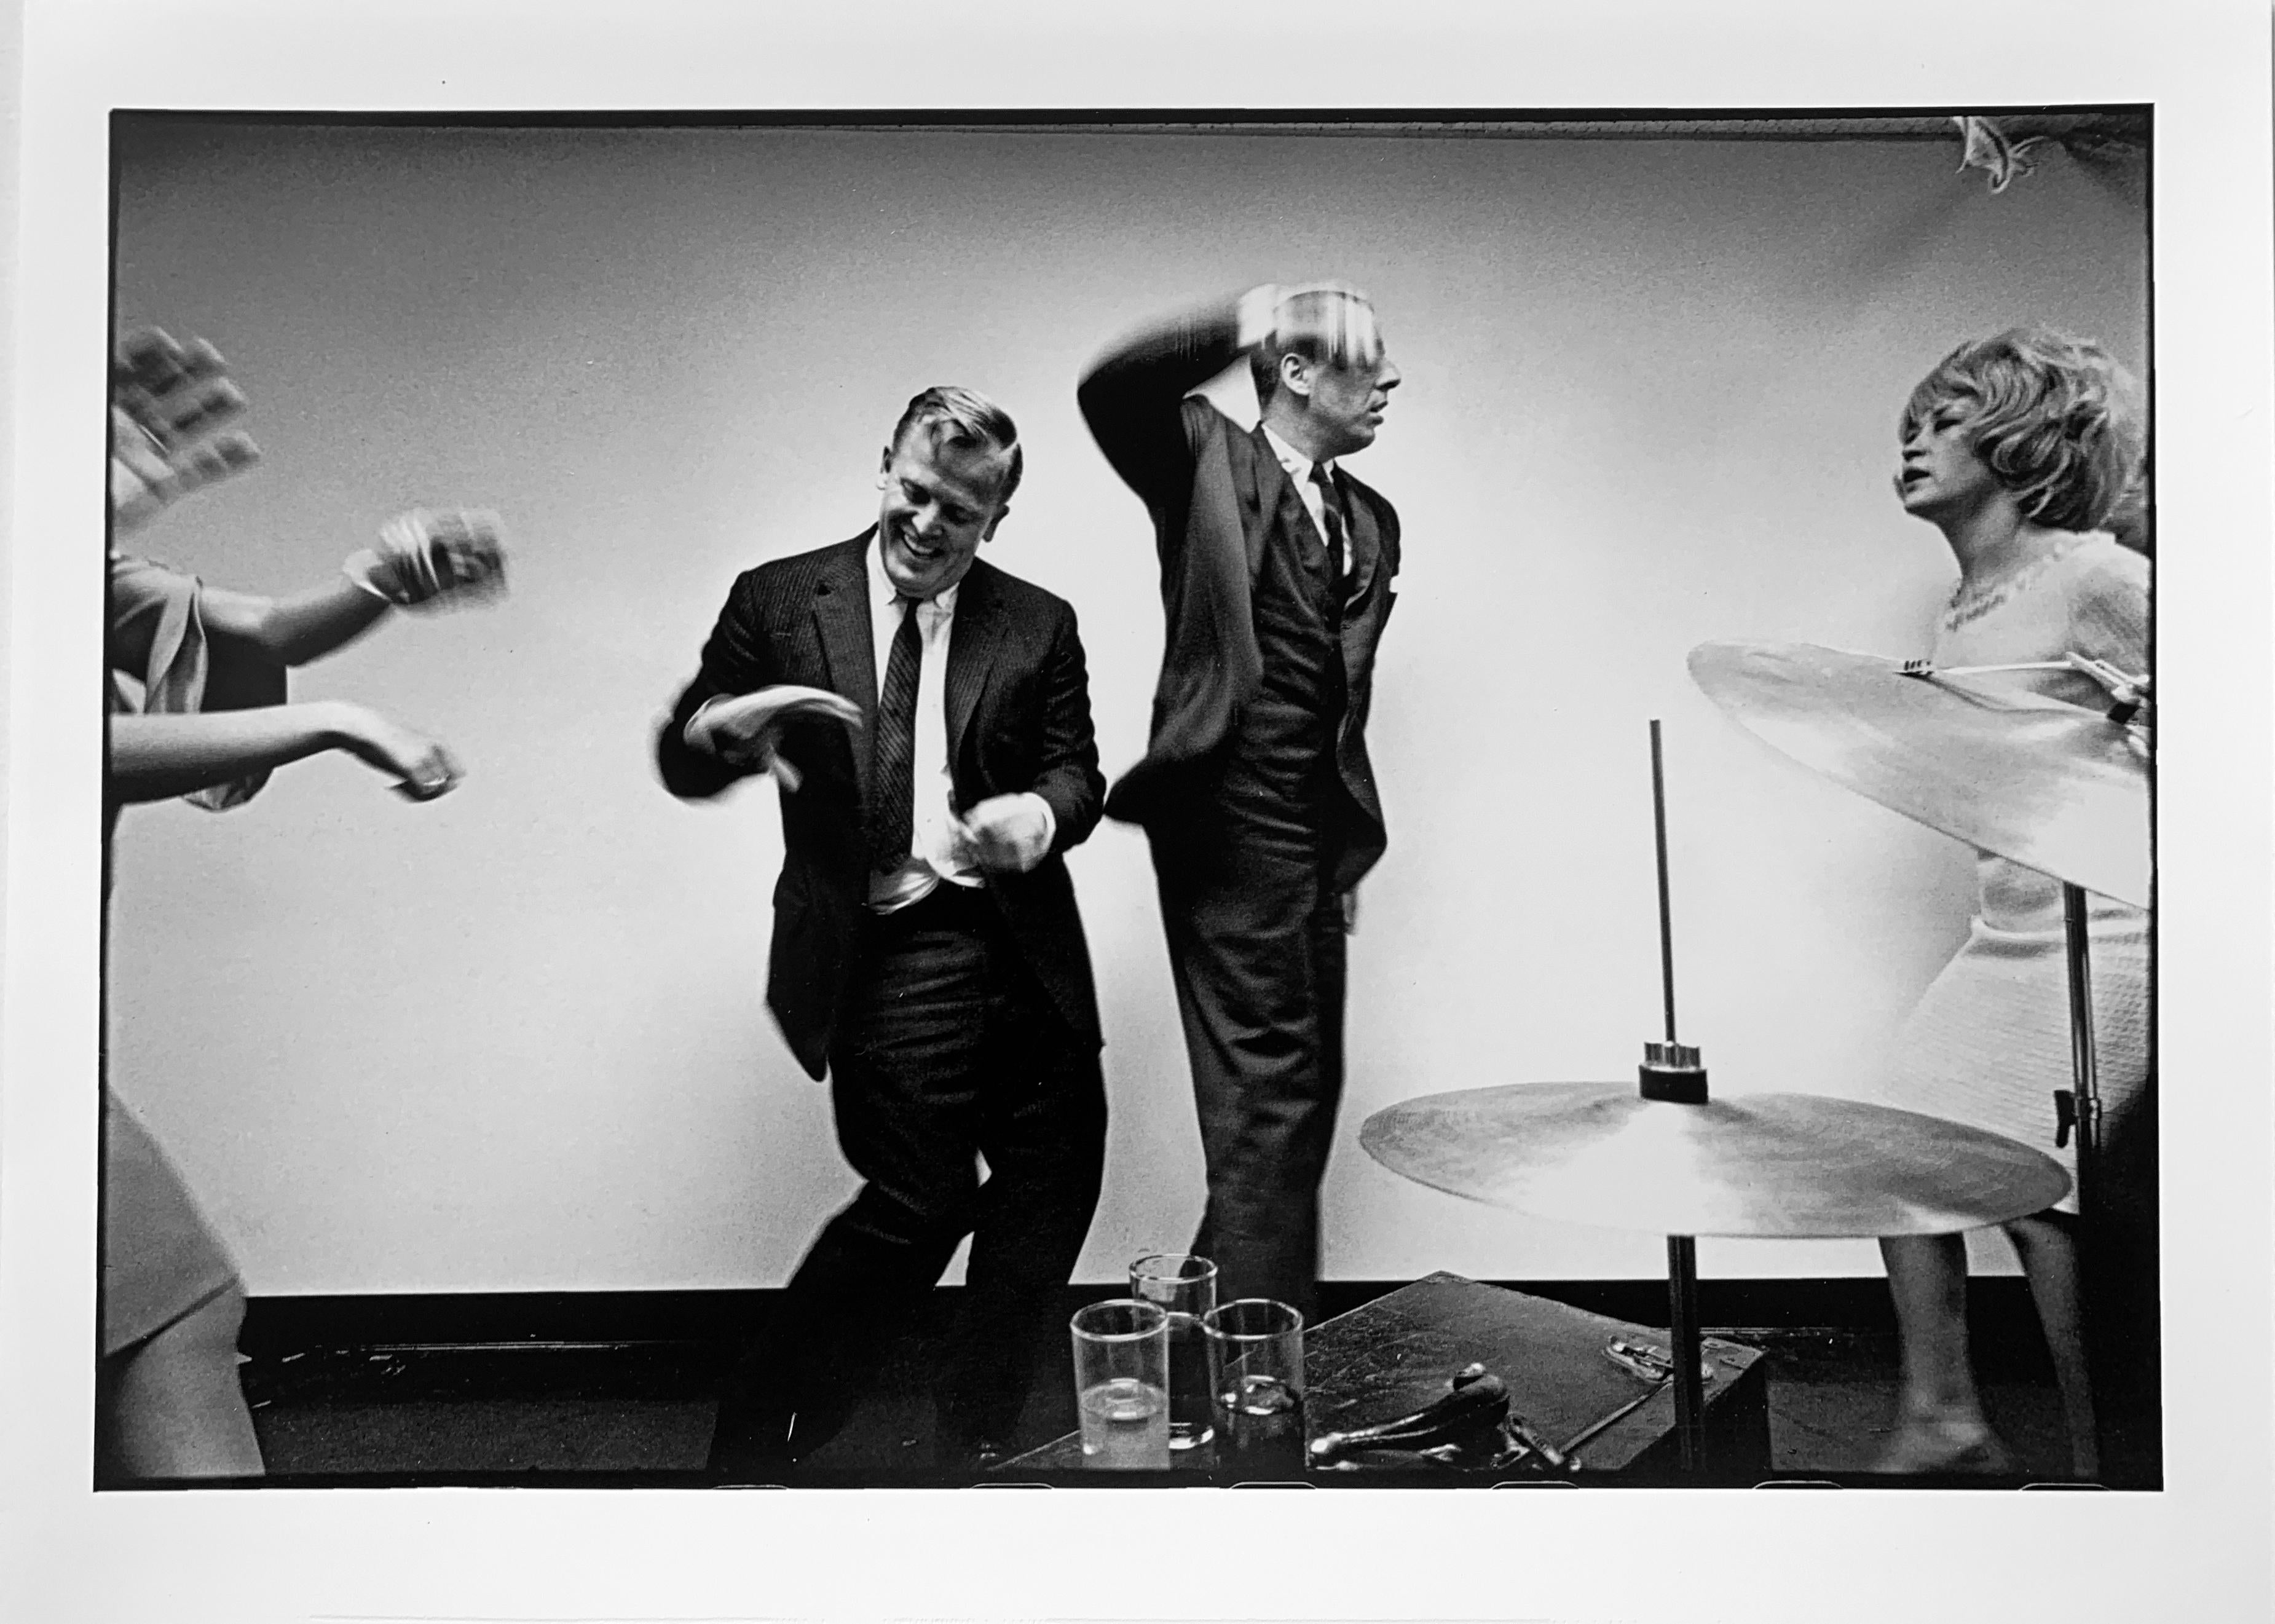 Leonard Freed Black and White Photograph - Office X-Mas Party, New York, Limited Ed Black and White Dance Party Photo 1960s